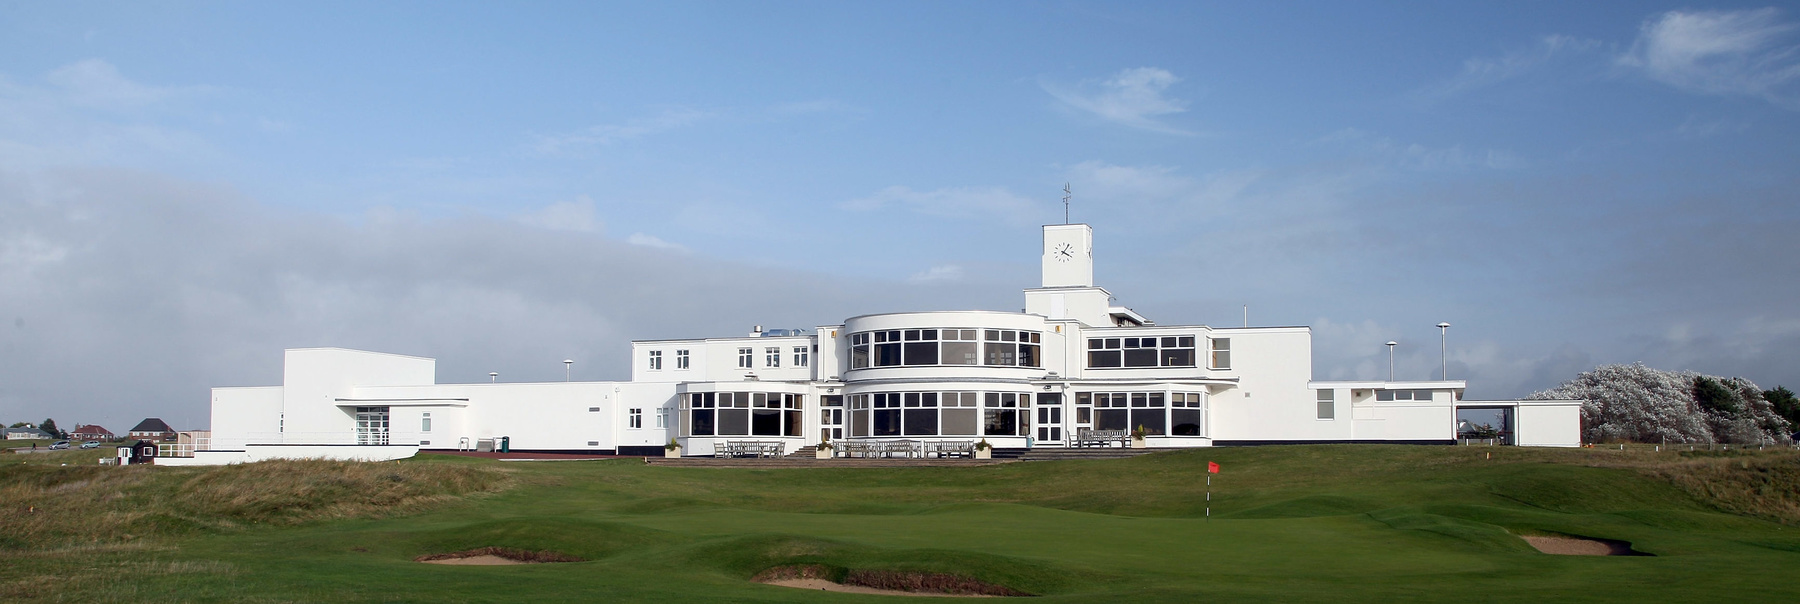 Royal Birkdale Golf Club Venue For 2017 Open Championship